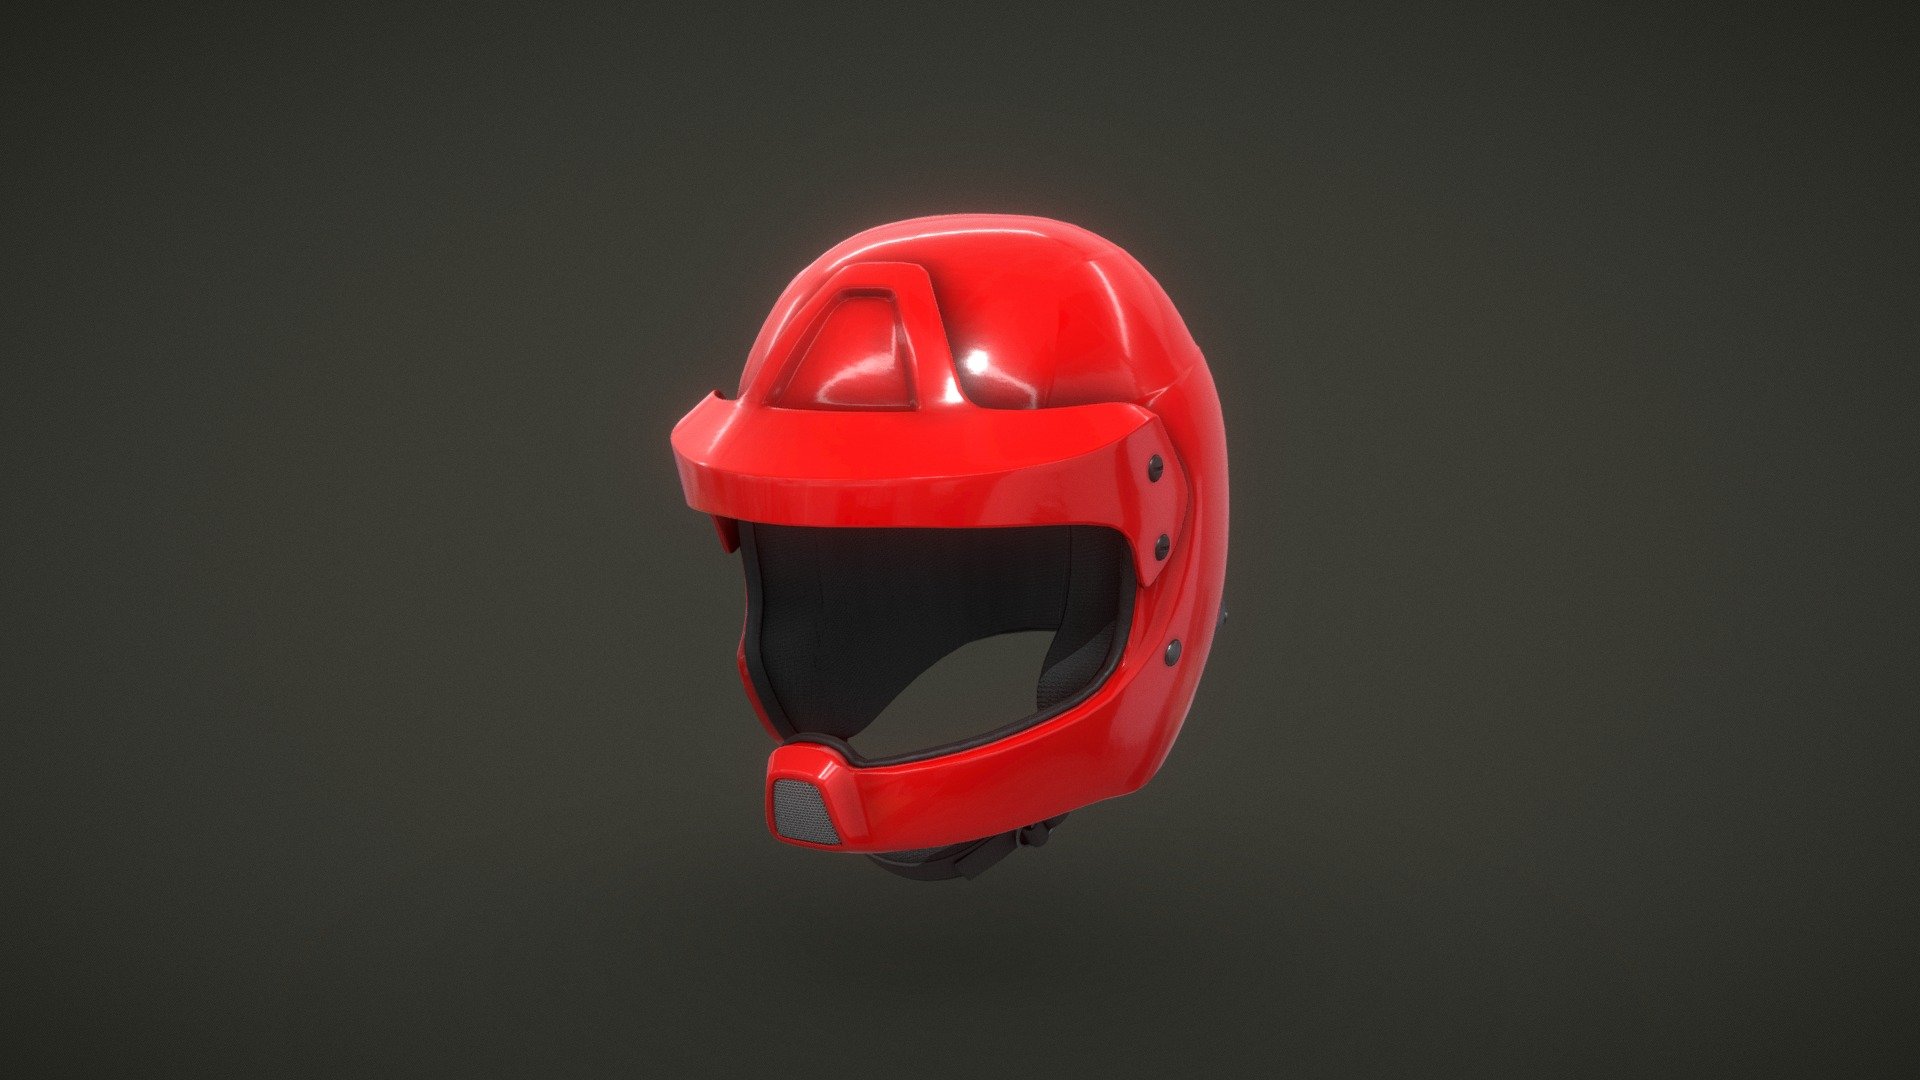 If you decide to puchase this model I’ve included a PSD of the helmet’s UVs for creating custom designs 3d model